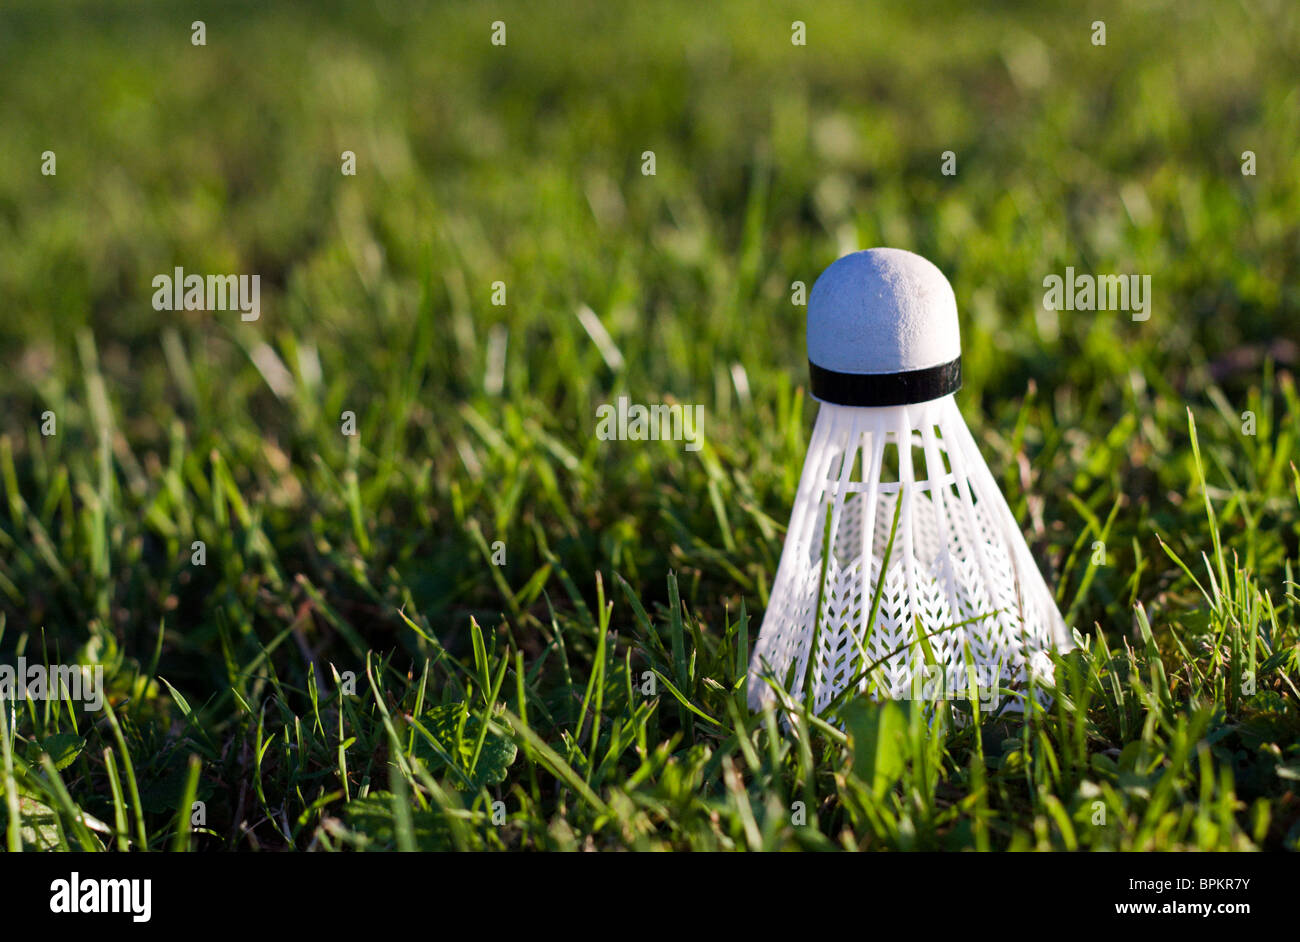 A badminton in the grass. Stock Photo